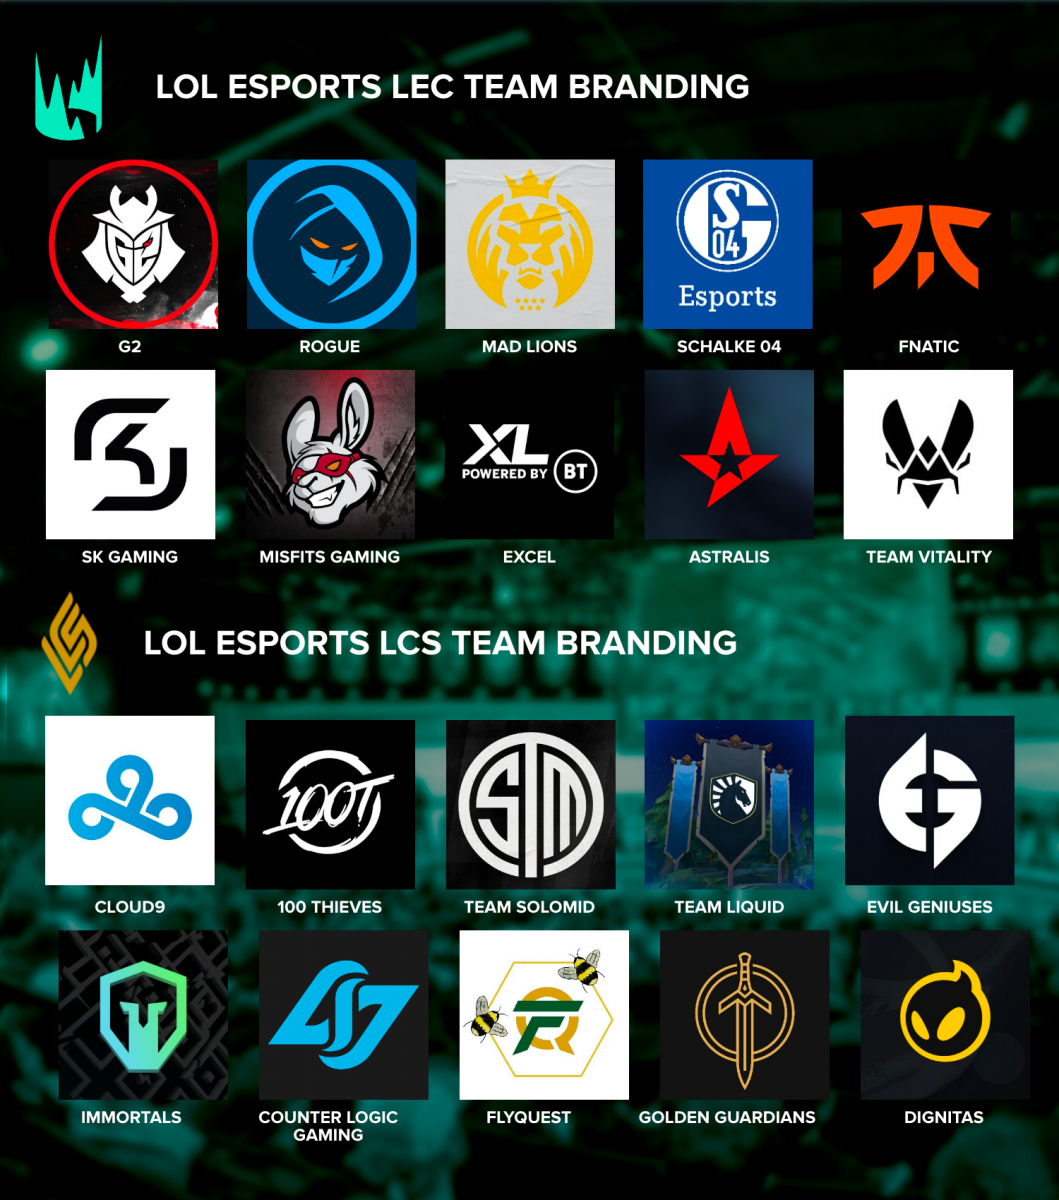 Turquoise: Selections of LoL Esports Team Branding